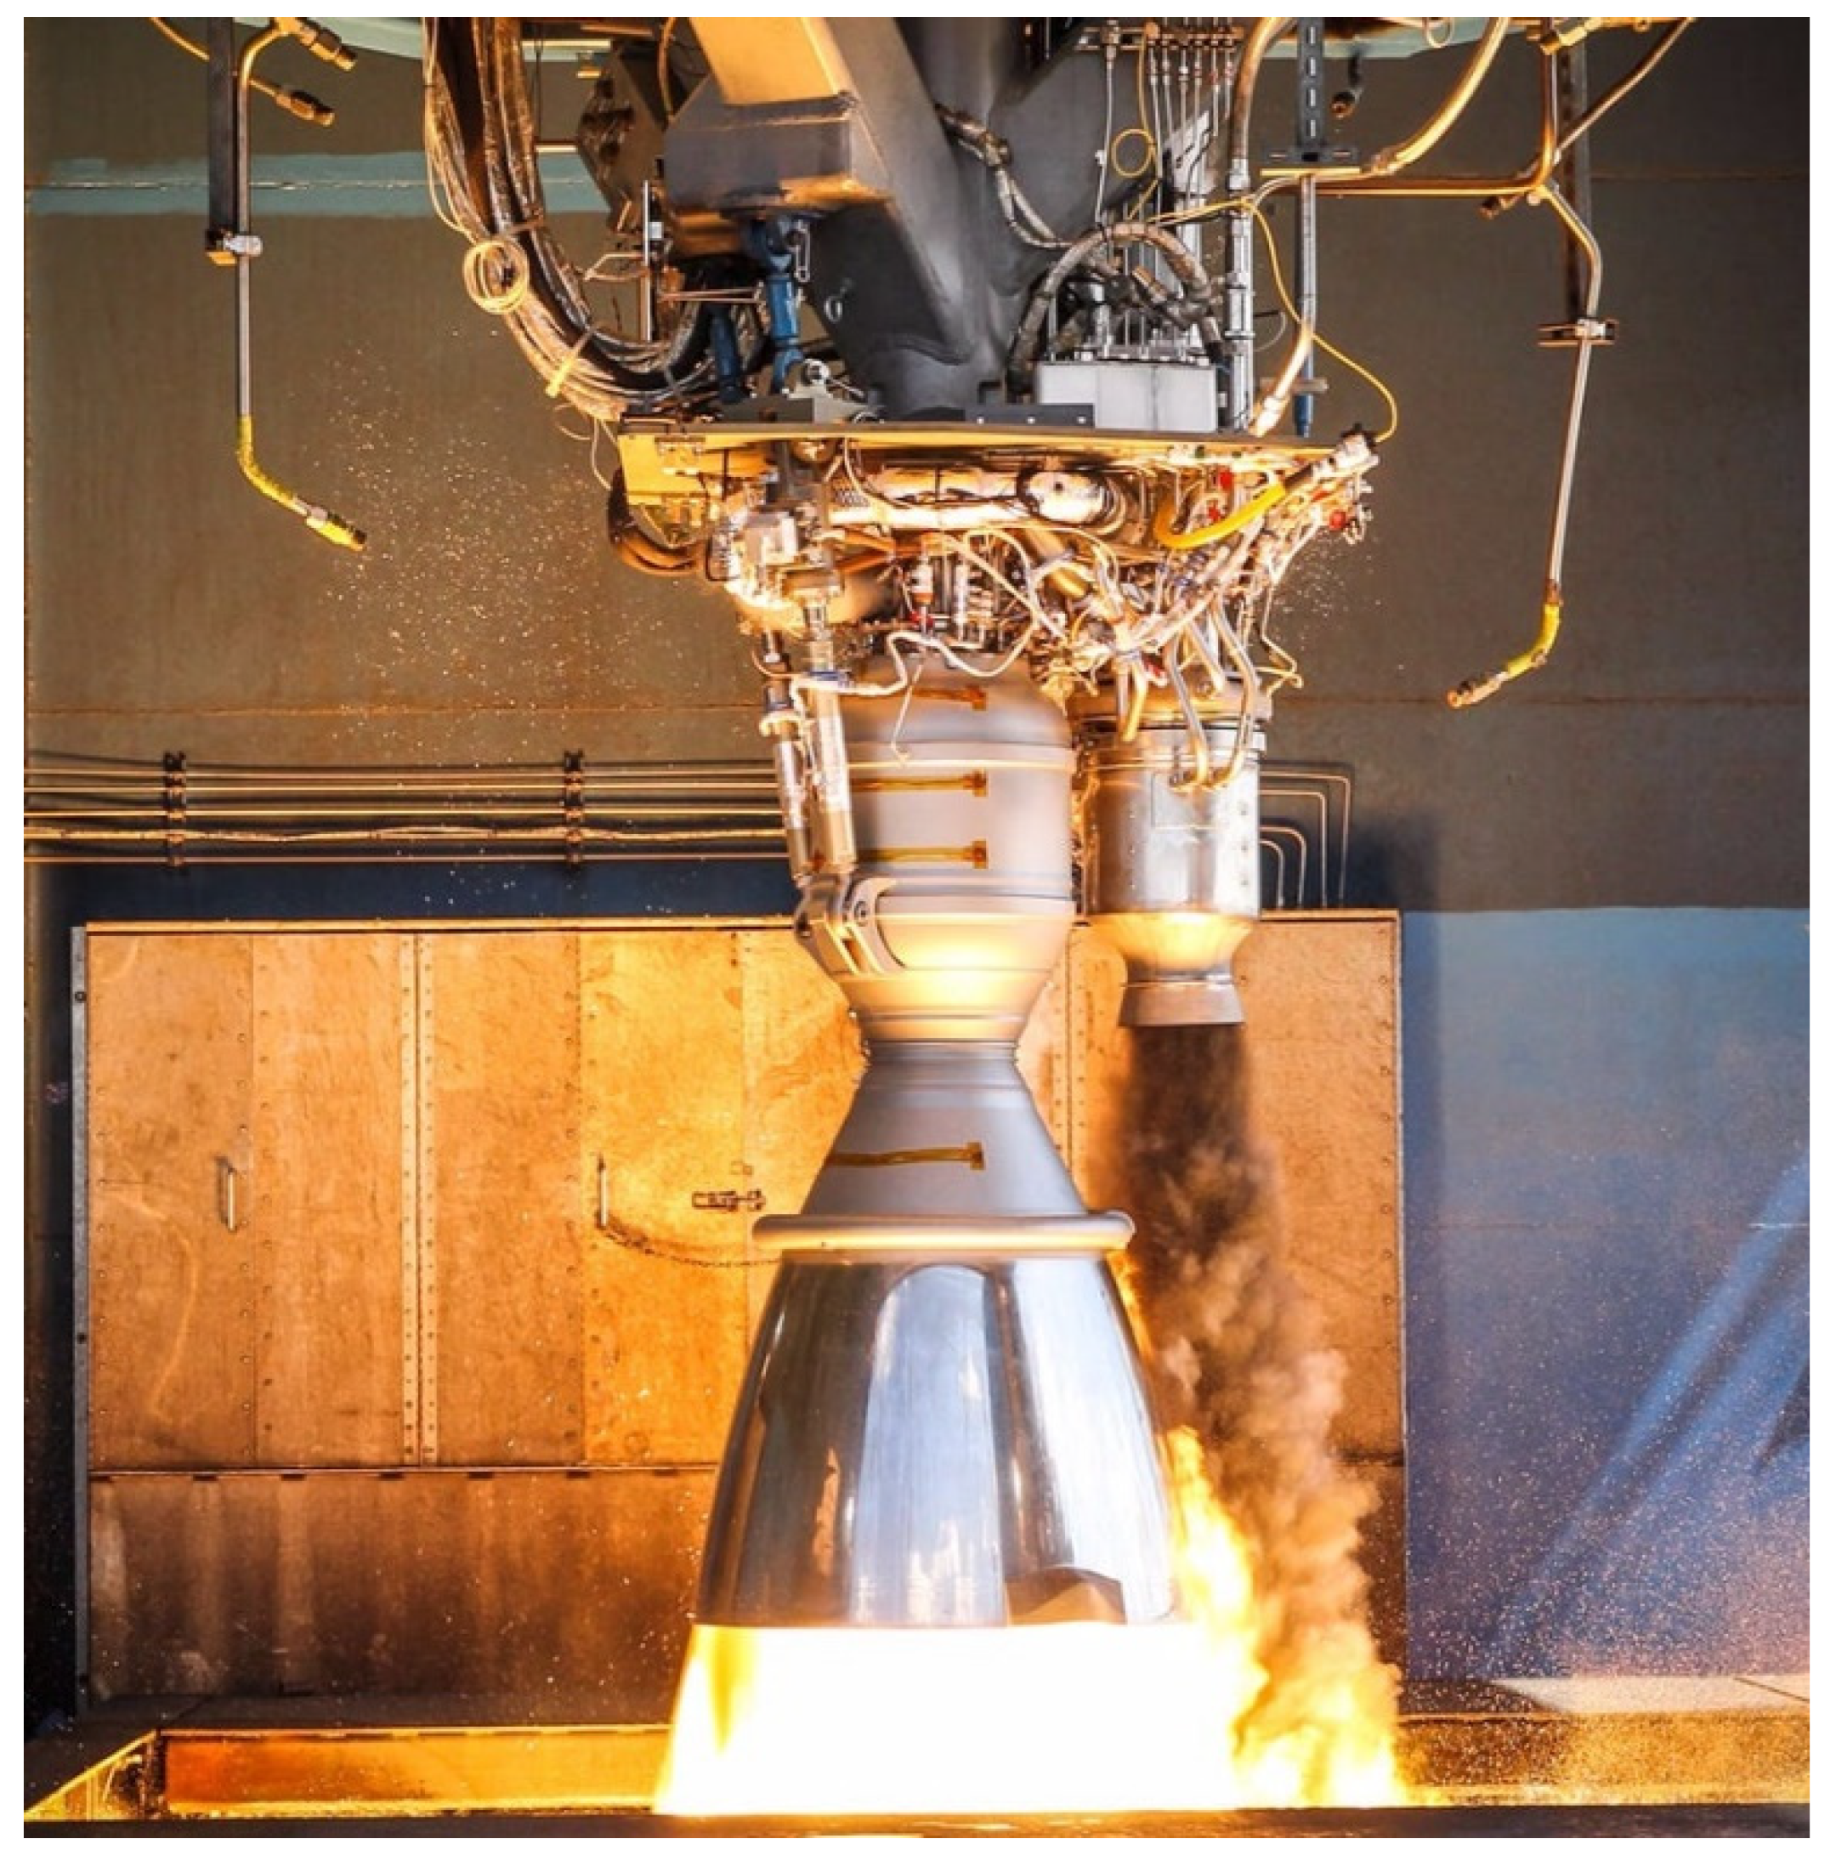 NASA Is Awarded $125 Million to Develop Nuclear Rocket Propulsion